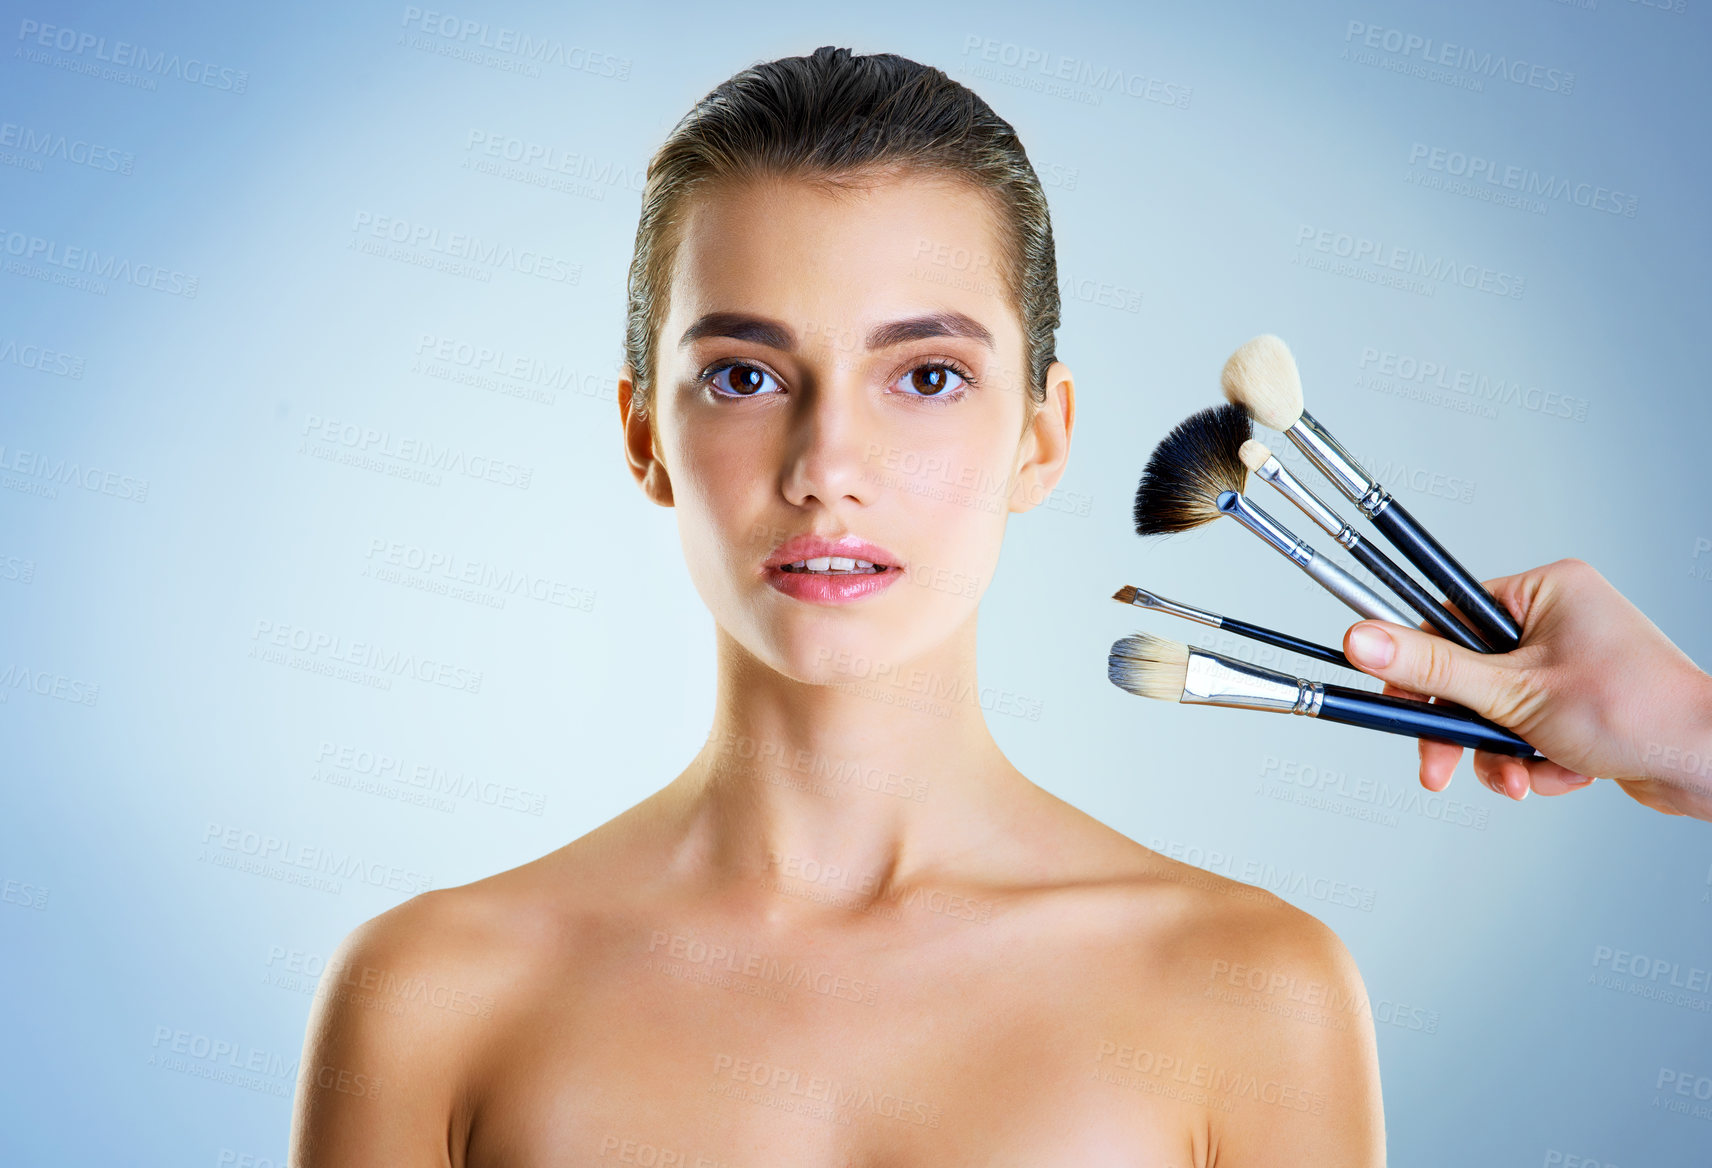 Buy stock photo Studio portrait of a hand holding makeup brushes next to a beautiful young woman against a blue background